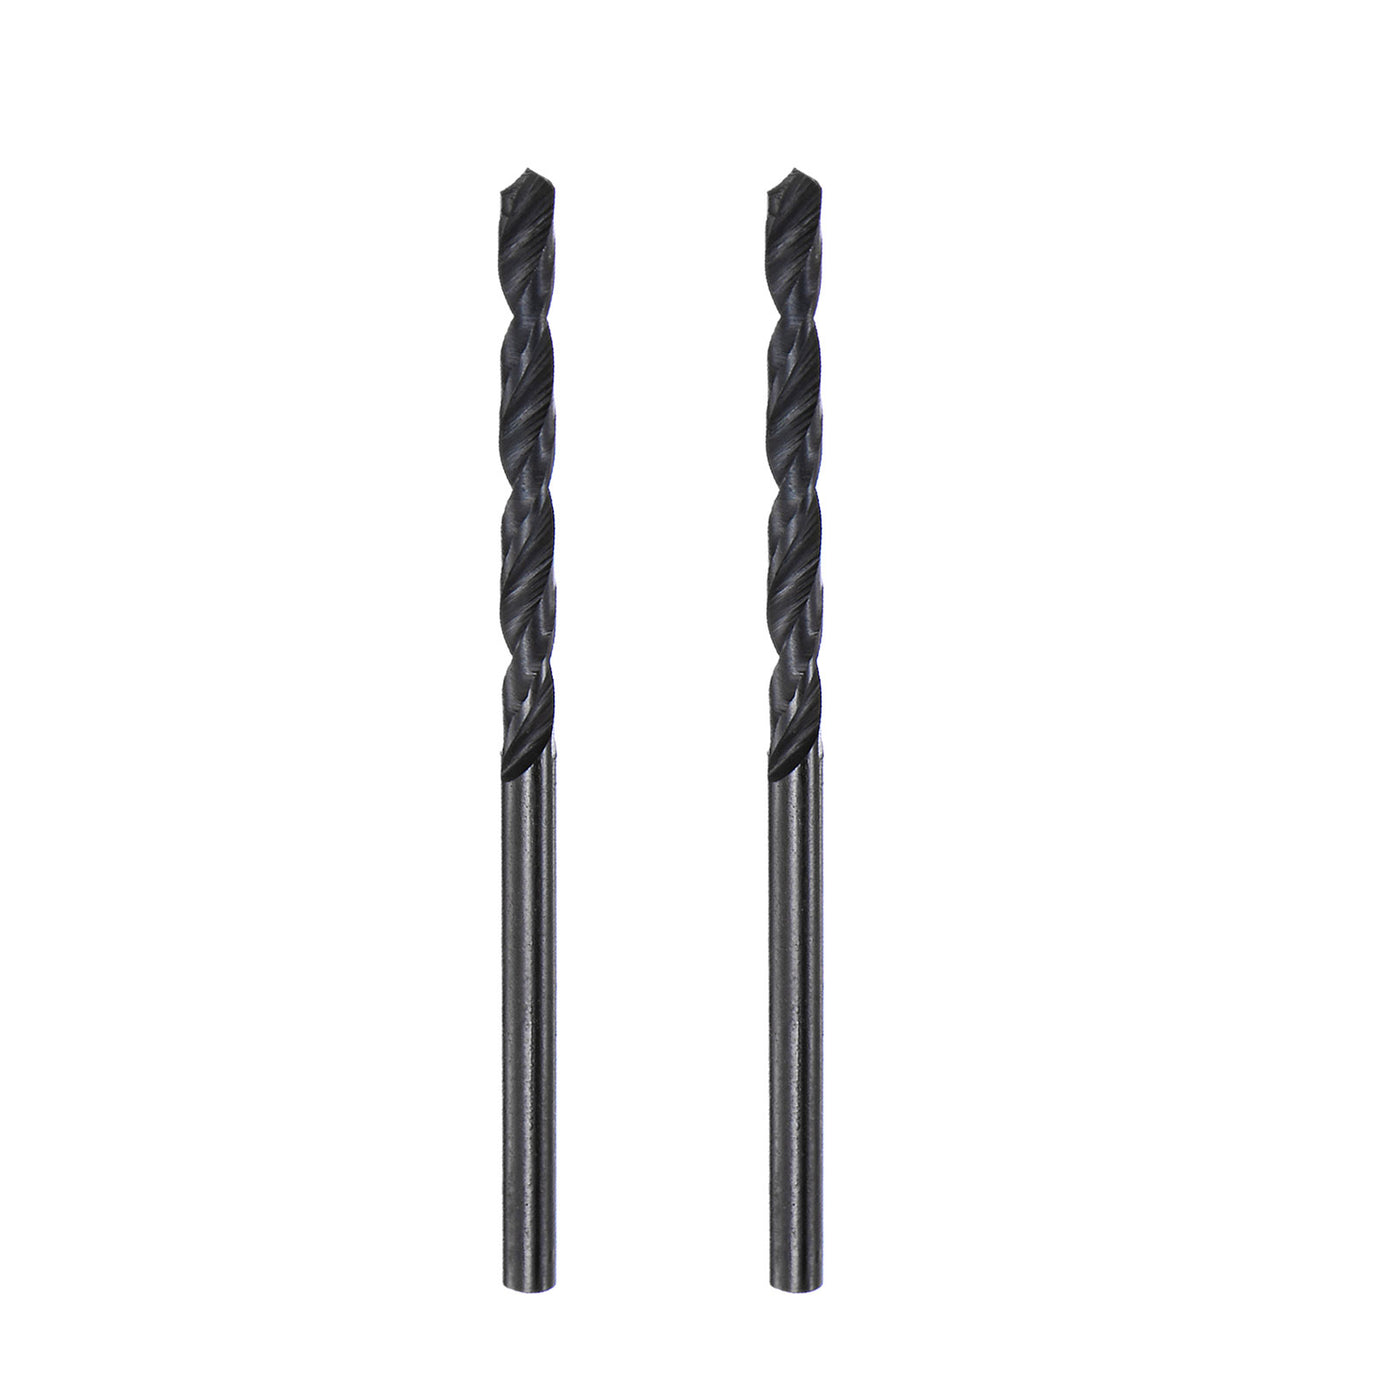 uxcell Uxcell High Speed Steel Twist Drill Bit, 2.8mm Fully Ground Black Oxide 59mm Long 2Pcs